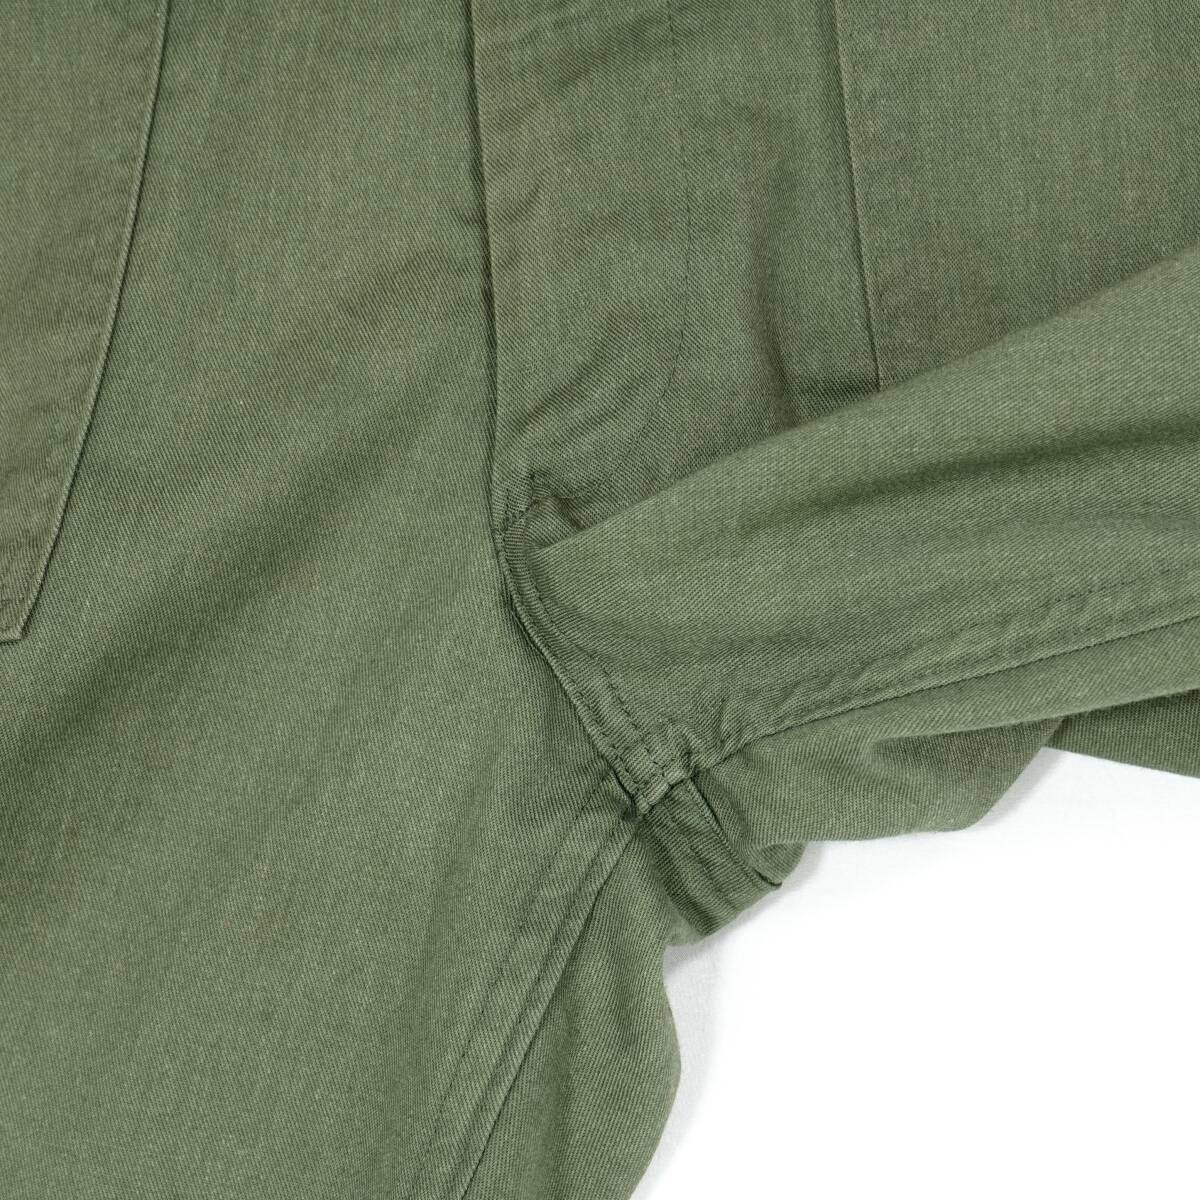 US ARMY UTILITY TROUSERS OG-507 1985s W30 L33 MIL24009 Vintage アメリカ軍 ベイカーパンツ 1980年代 アメリカ製 ヴィンテージ_画像6